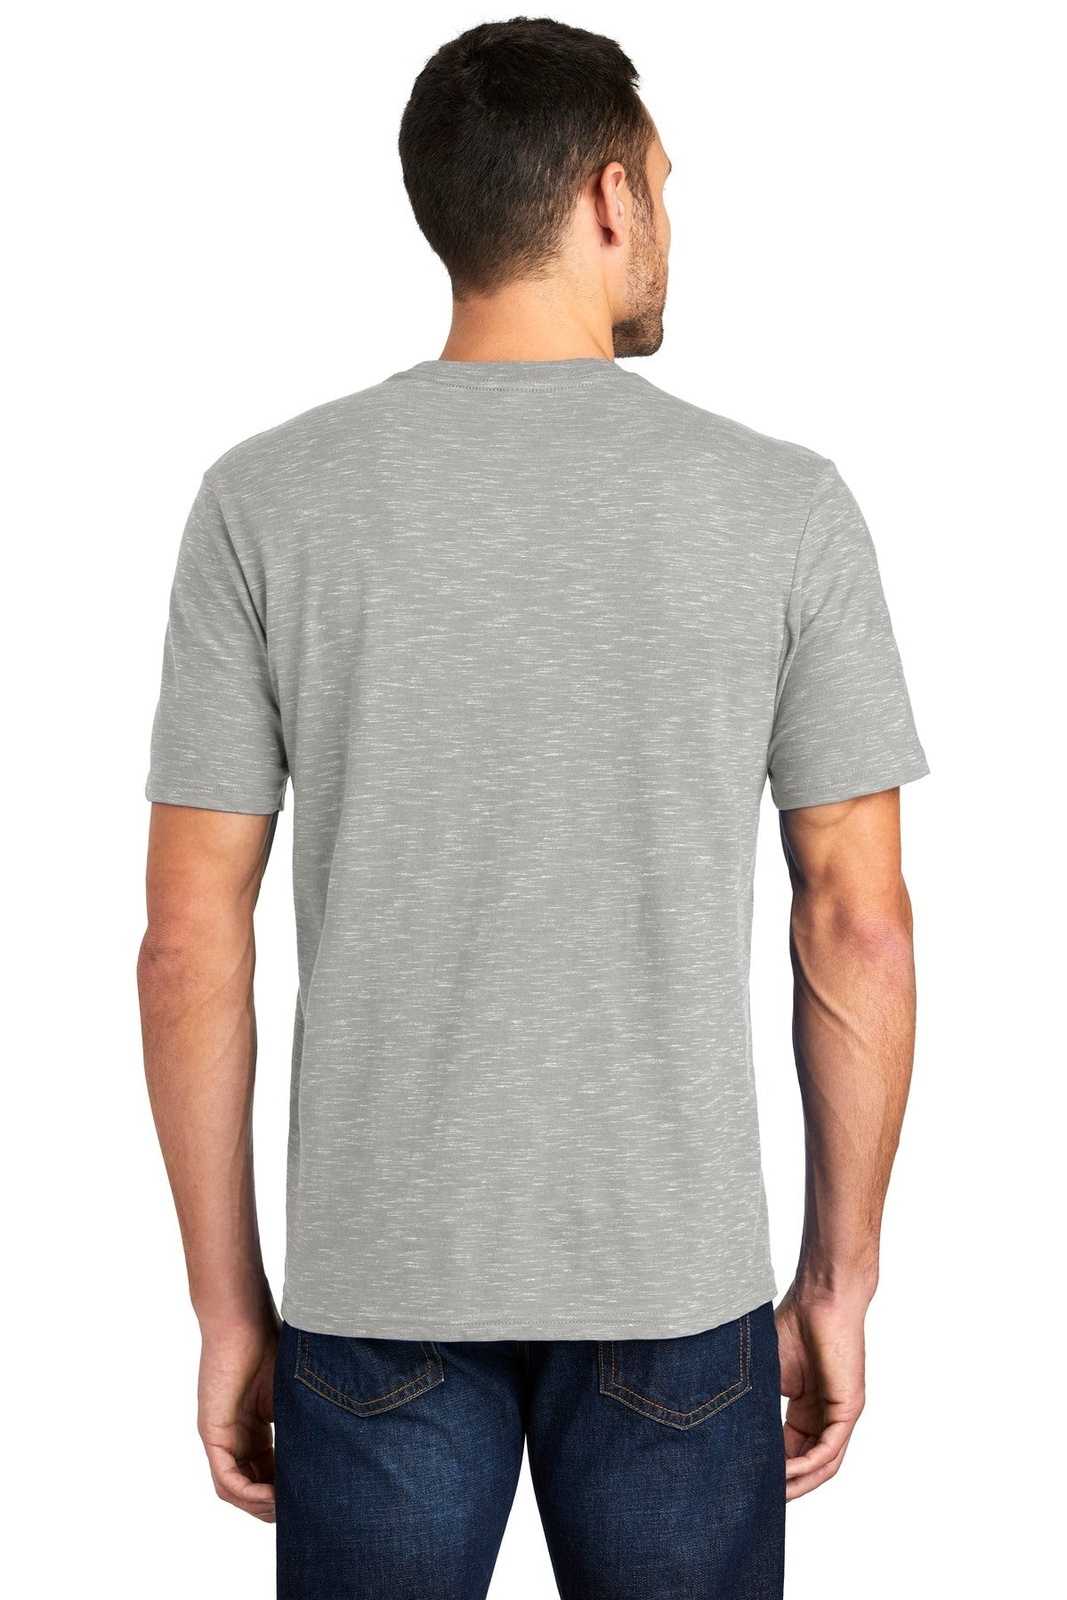 District DT564 Medal Tee - Light Gray - HIT a Double - 2